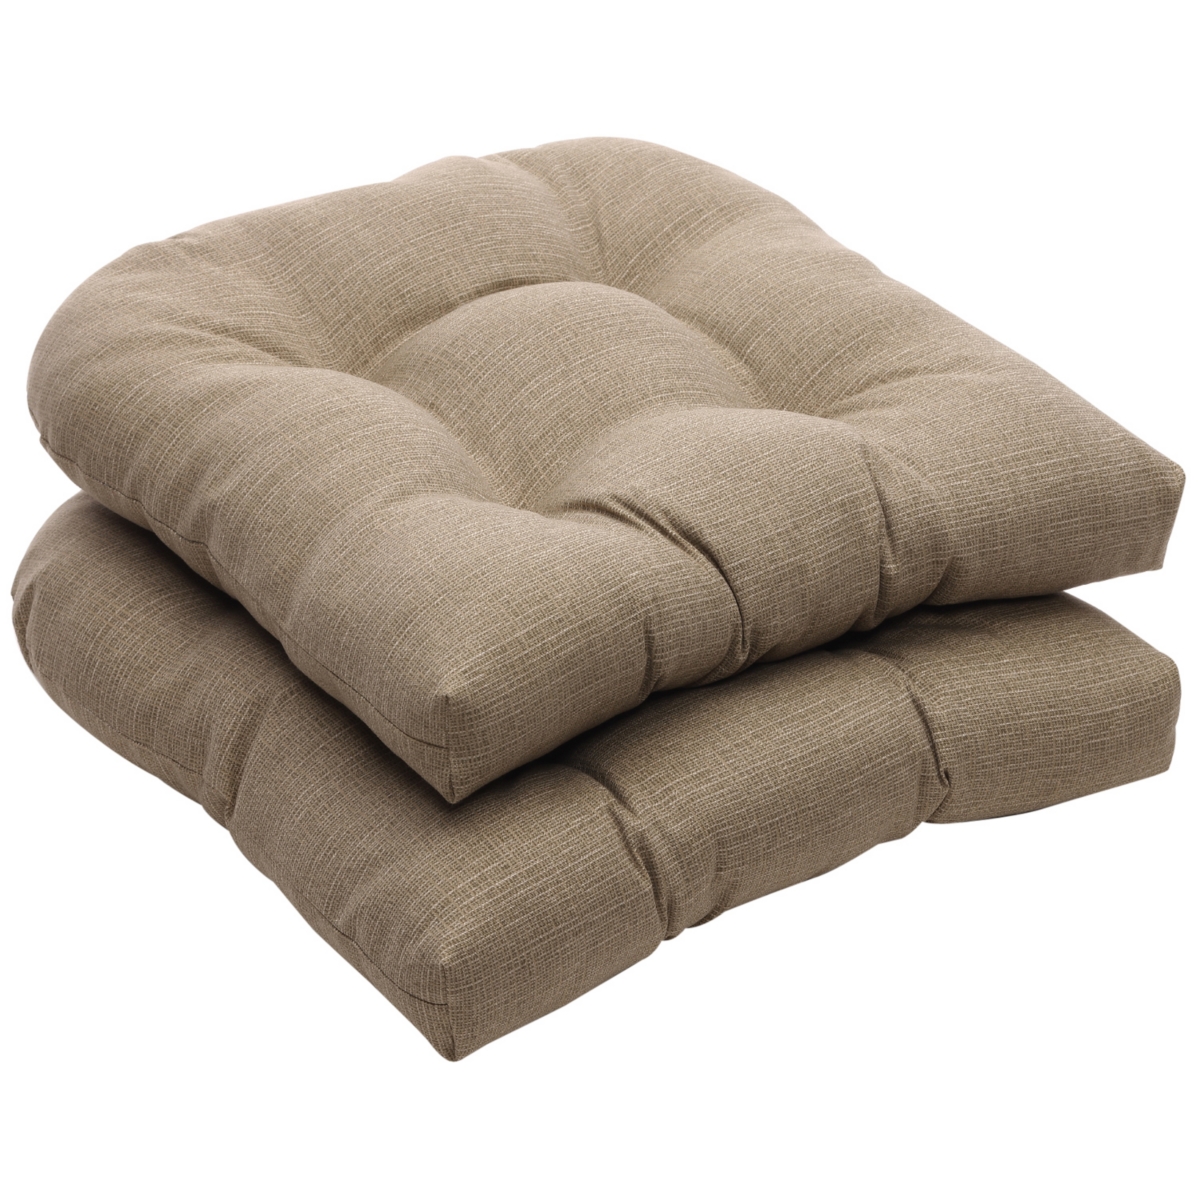 Monti 19" x 19" Outdoor Chair Pad Seat Cushions Set of Two - Tan